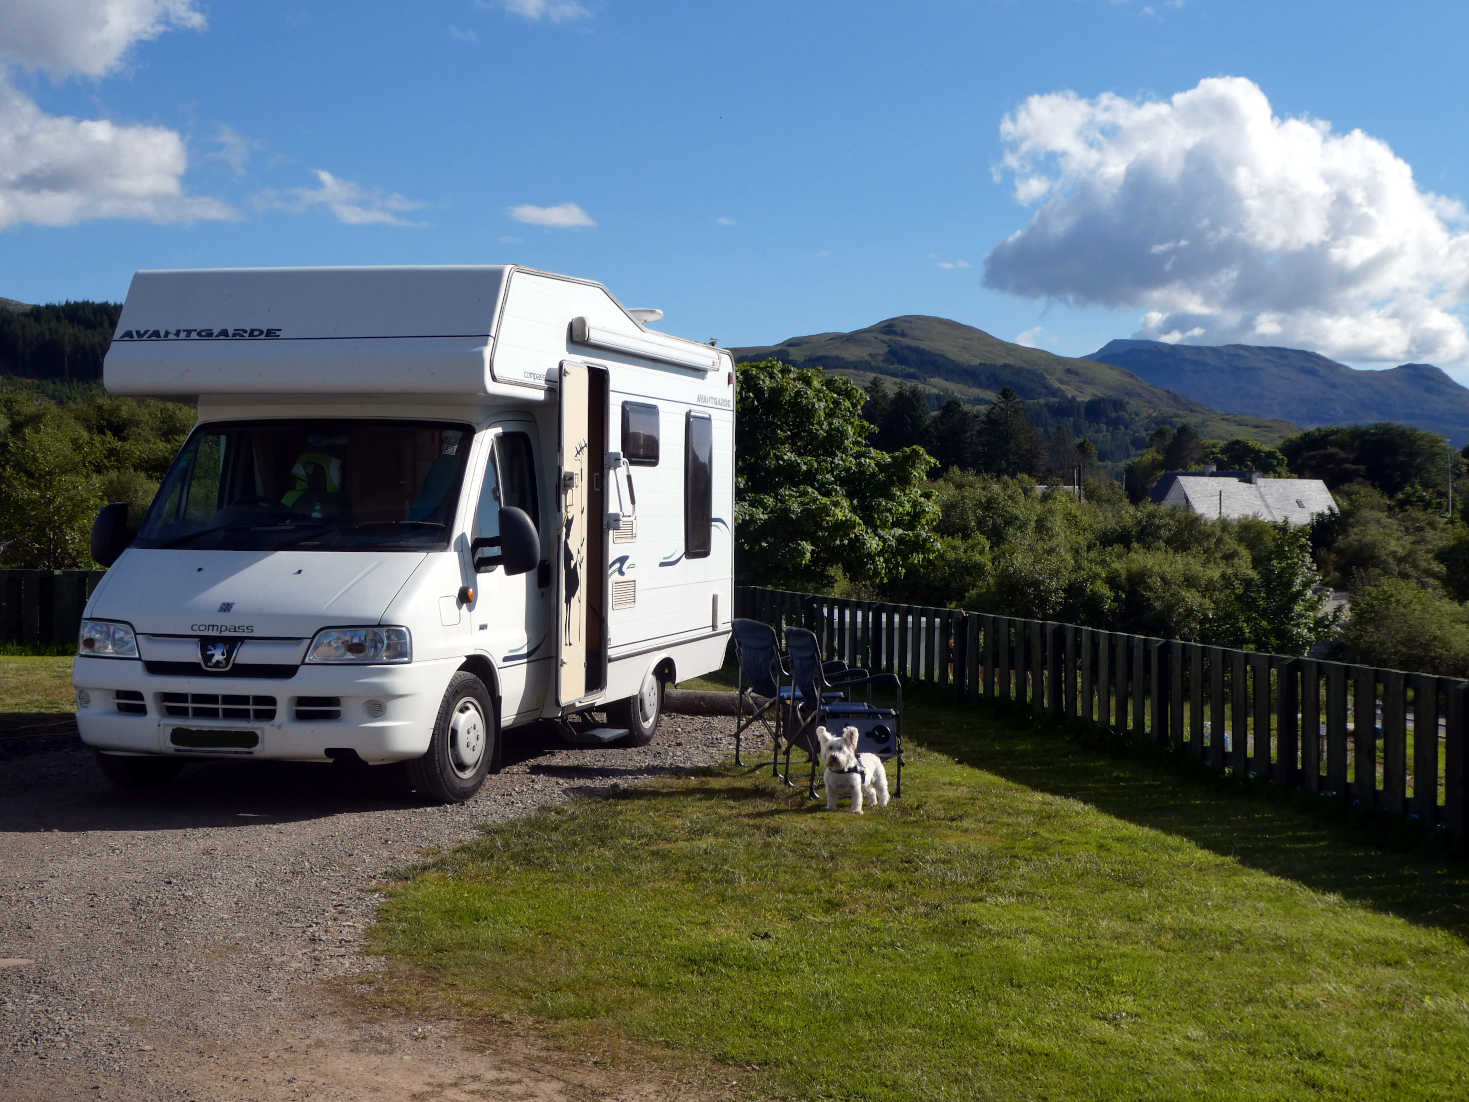 Poppy the westie makes camp at Salen Mull